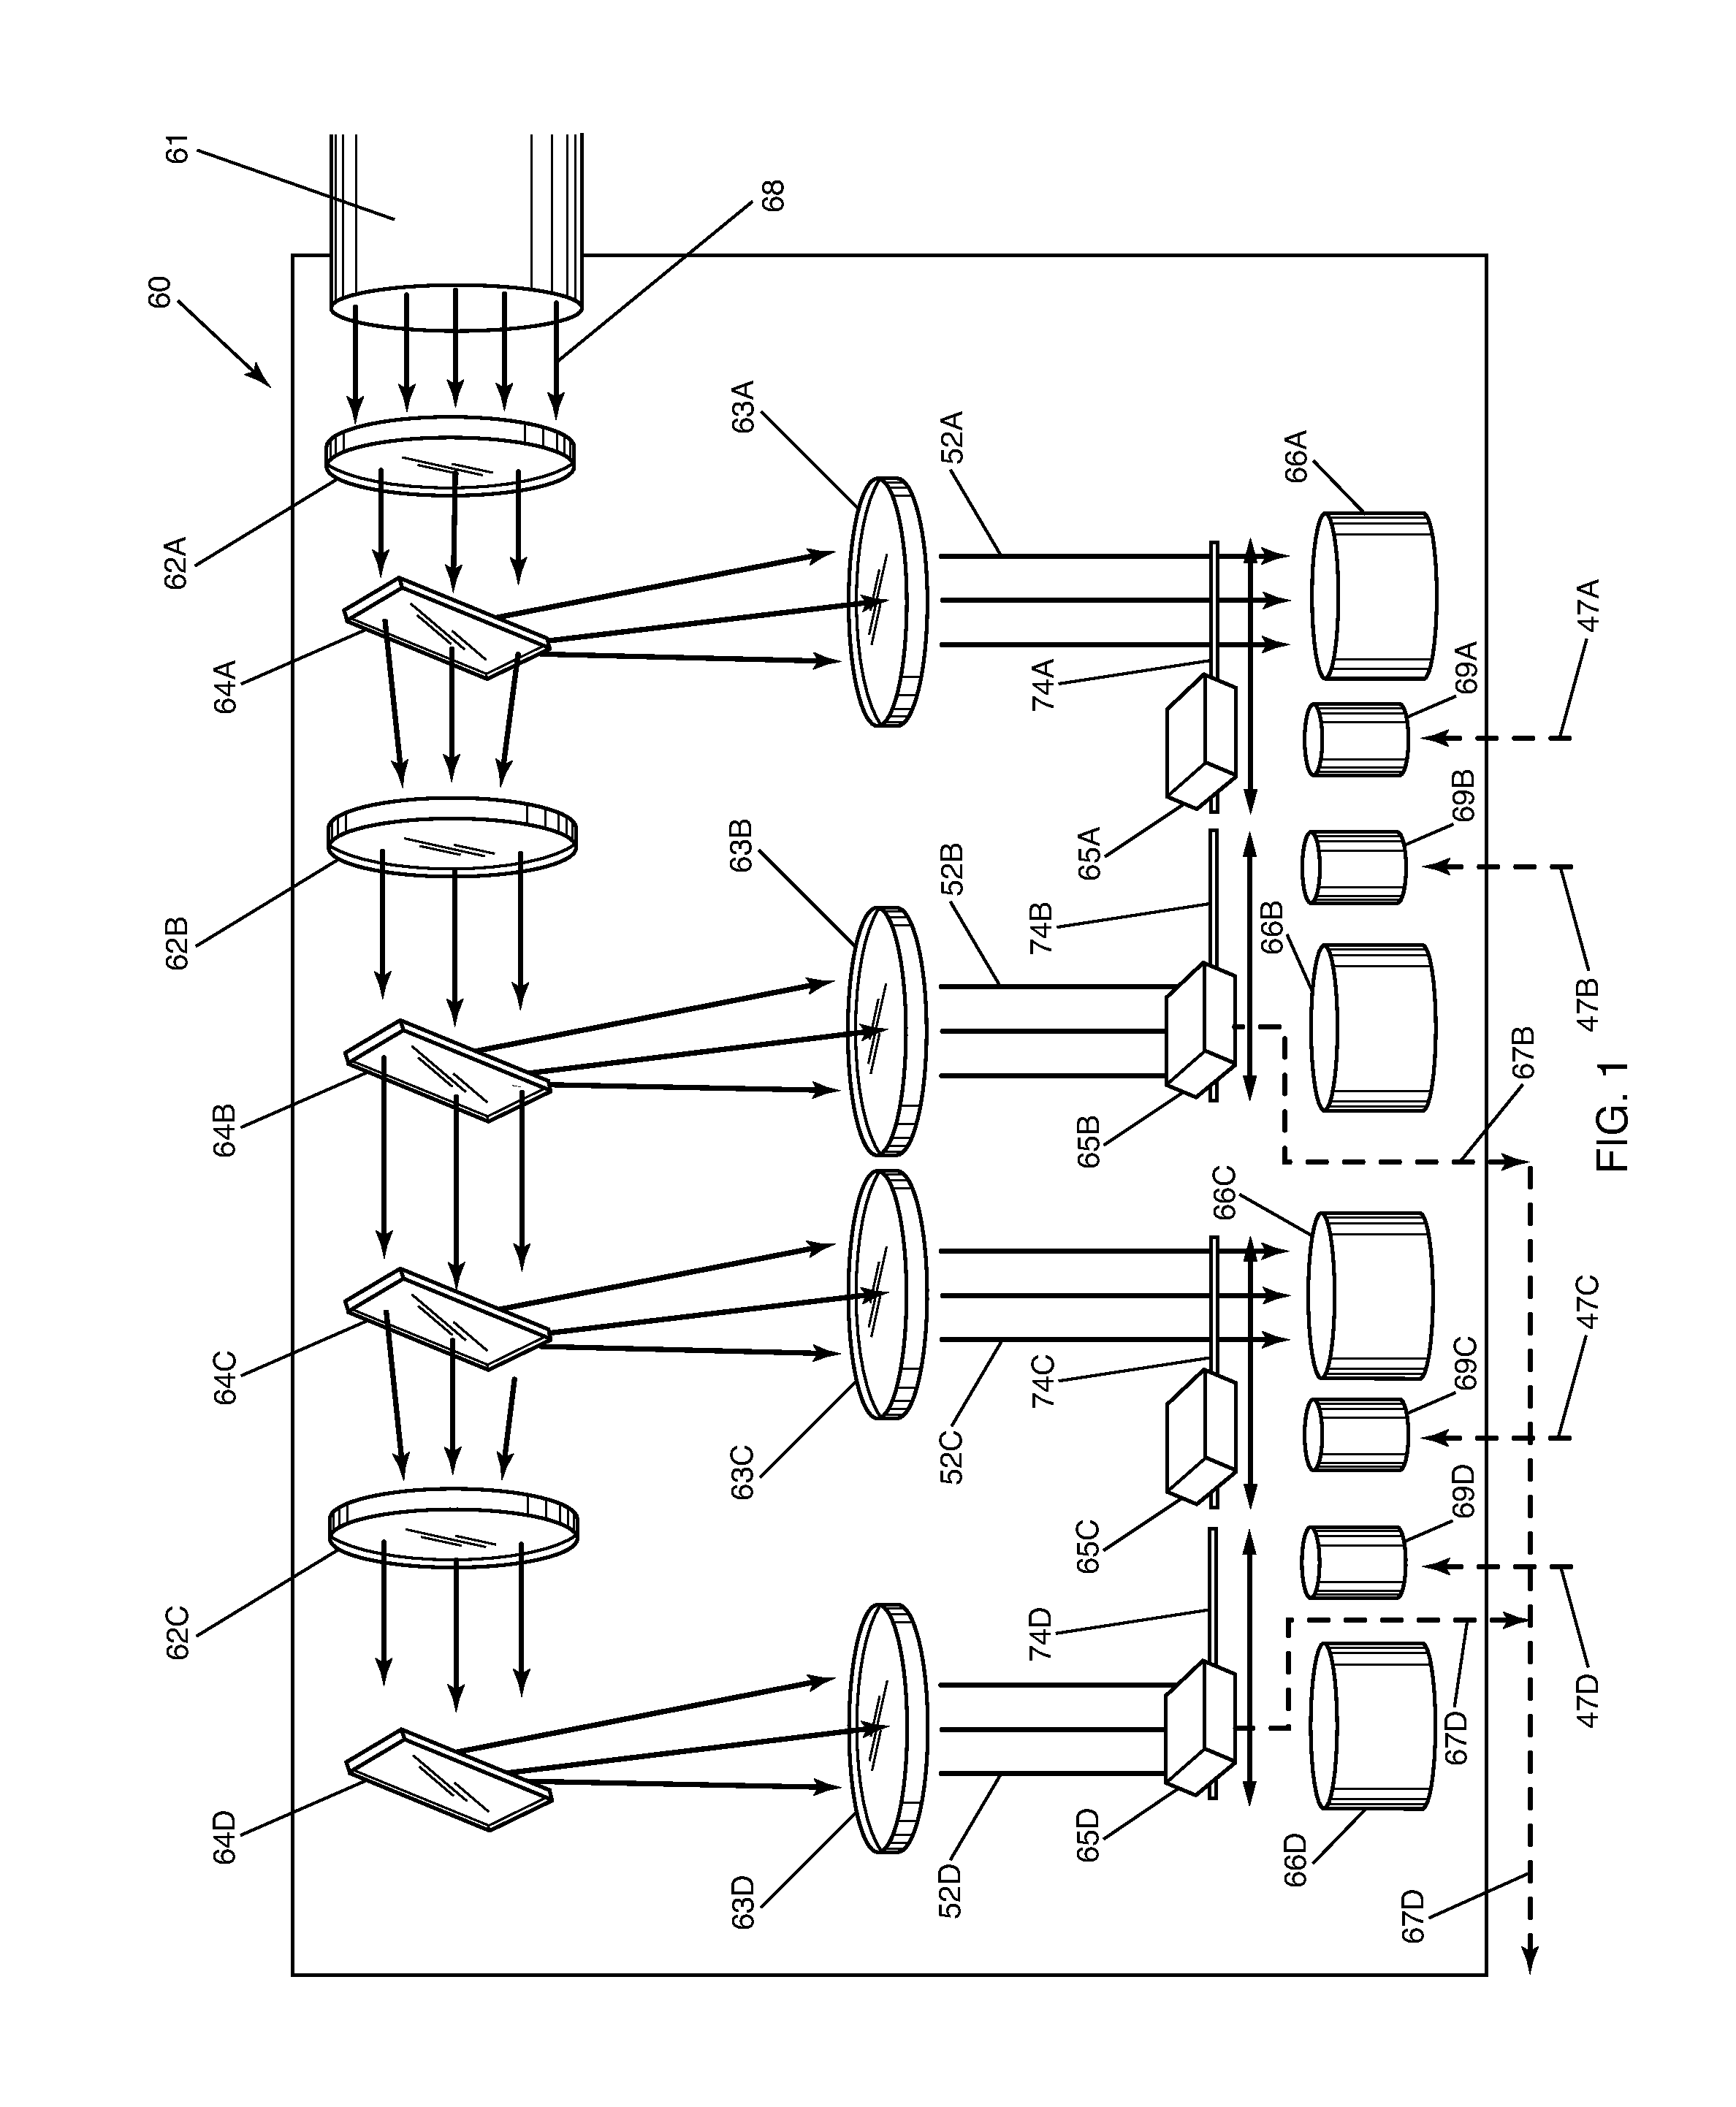 Apparatus and method for collecting and distributing radiation